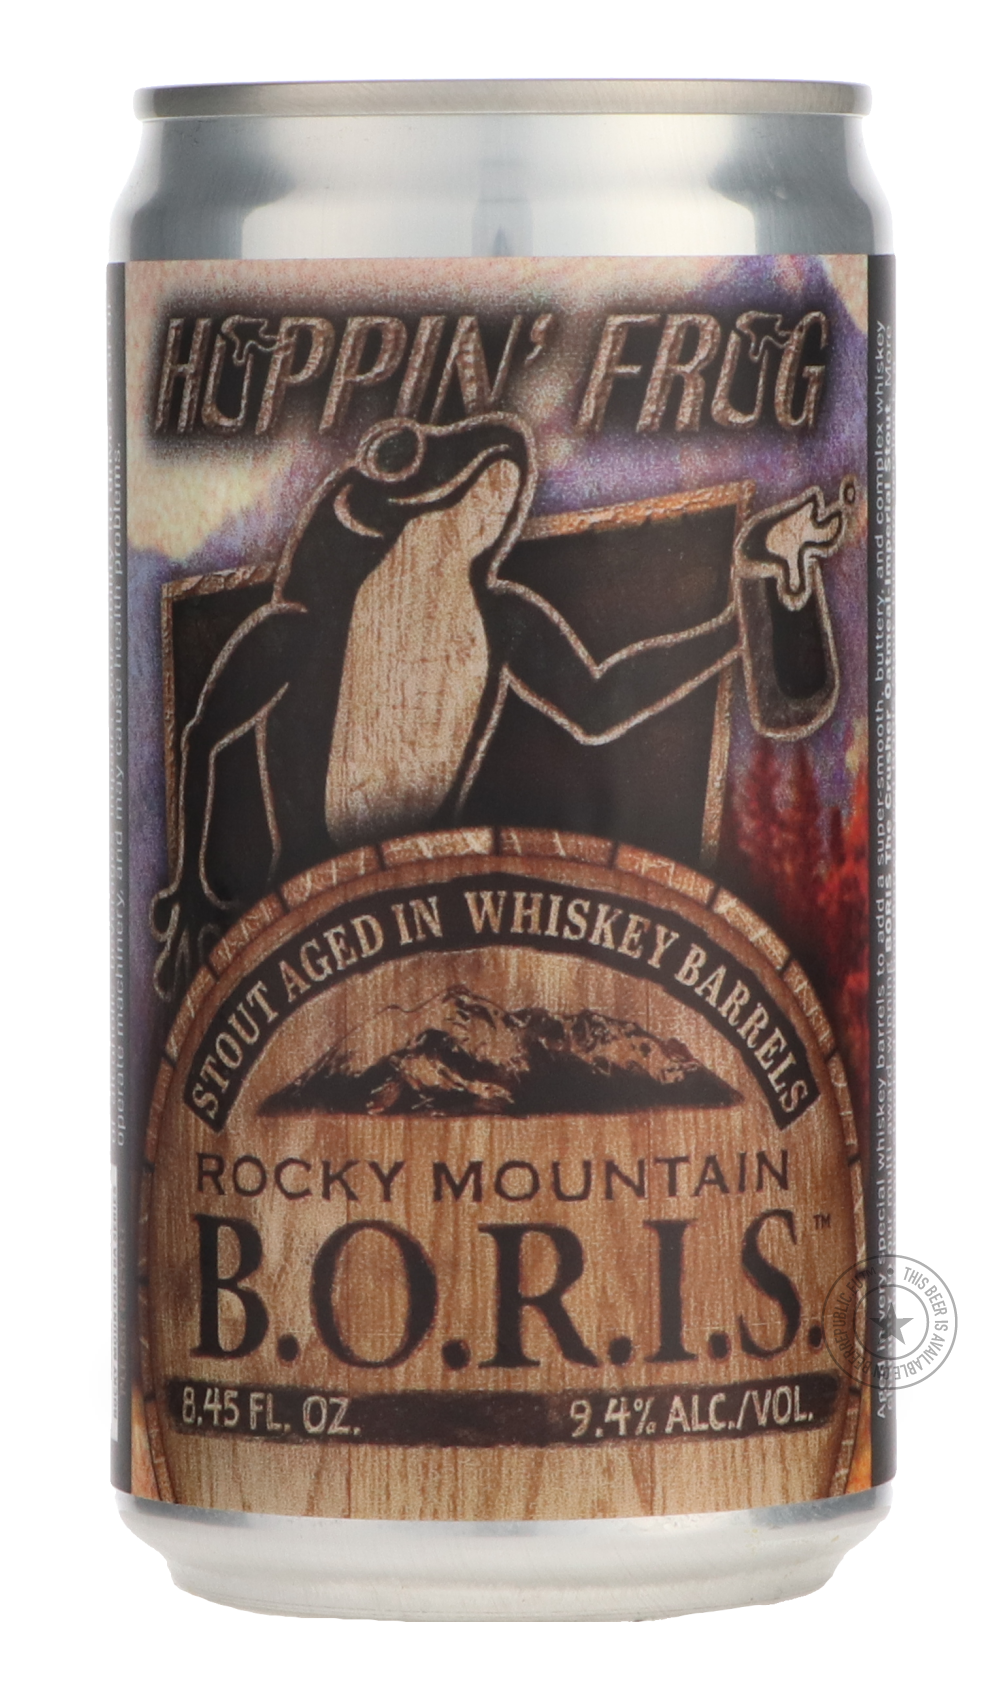 -Hoppin' Frog- Rocky Mountain Barrel Aged B.O.R.I.S.-Stout & Porter- Only @ Beer Republic - The best online beer store for American & Canadian craft beer - Buy beer online from the USA and Canada - Bier online kopen - Amerikaans bier kopen - Craft beer store - Craft beer kopen - Amerikanisch bier kaufen - Bier online kaufen - Acheter biere online - IPA - Stout - Porter - New England IPA - Hazy IPA - Imperial Stout - Barrel Aged - Barrel Aged Imperial Stout - Brown - Dark beer - Blond - Blonde - Pilsner - La